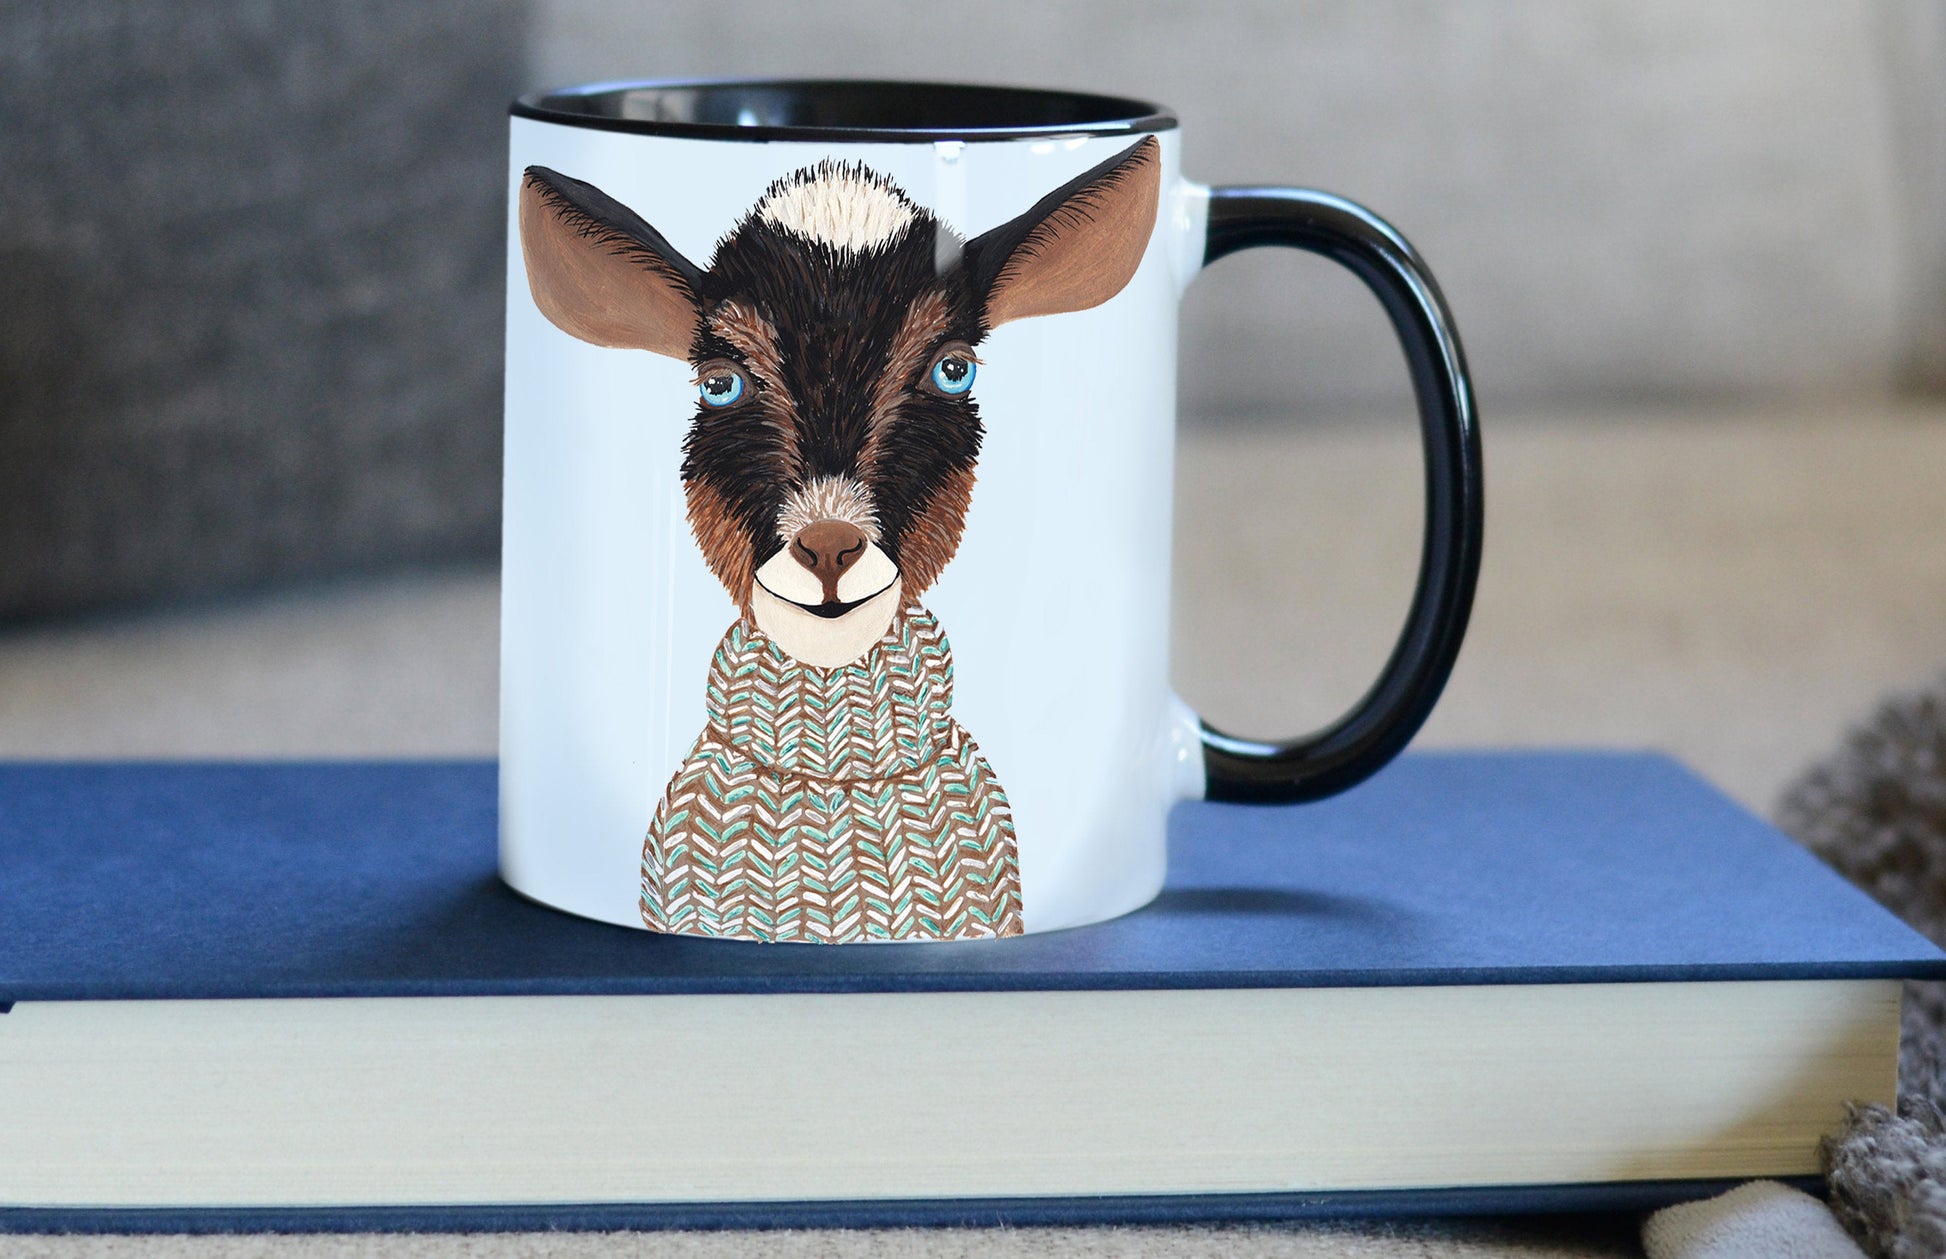 sweater goat mug sitting on a book with comfy couch in the background